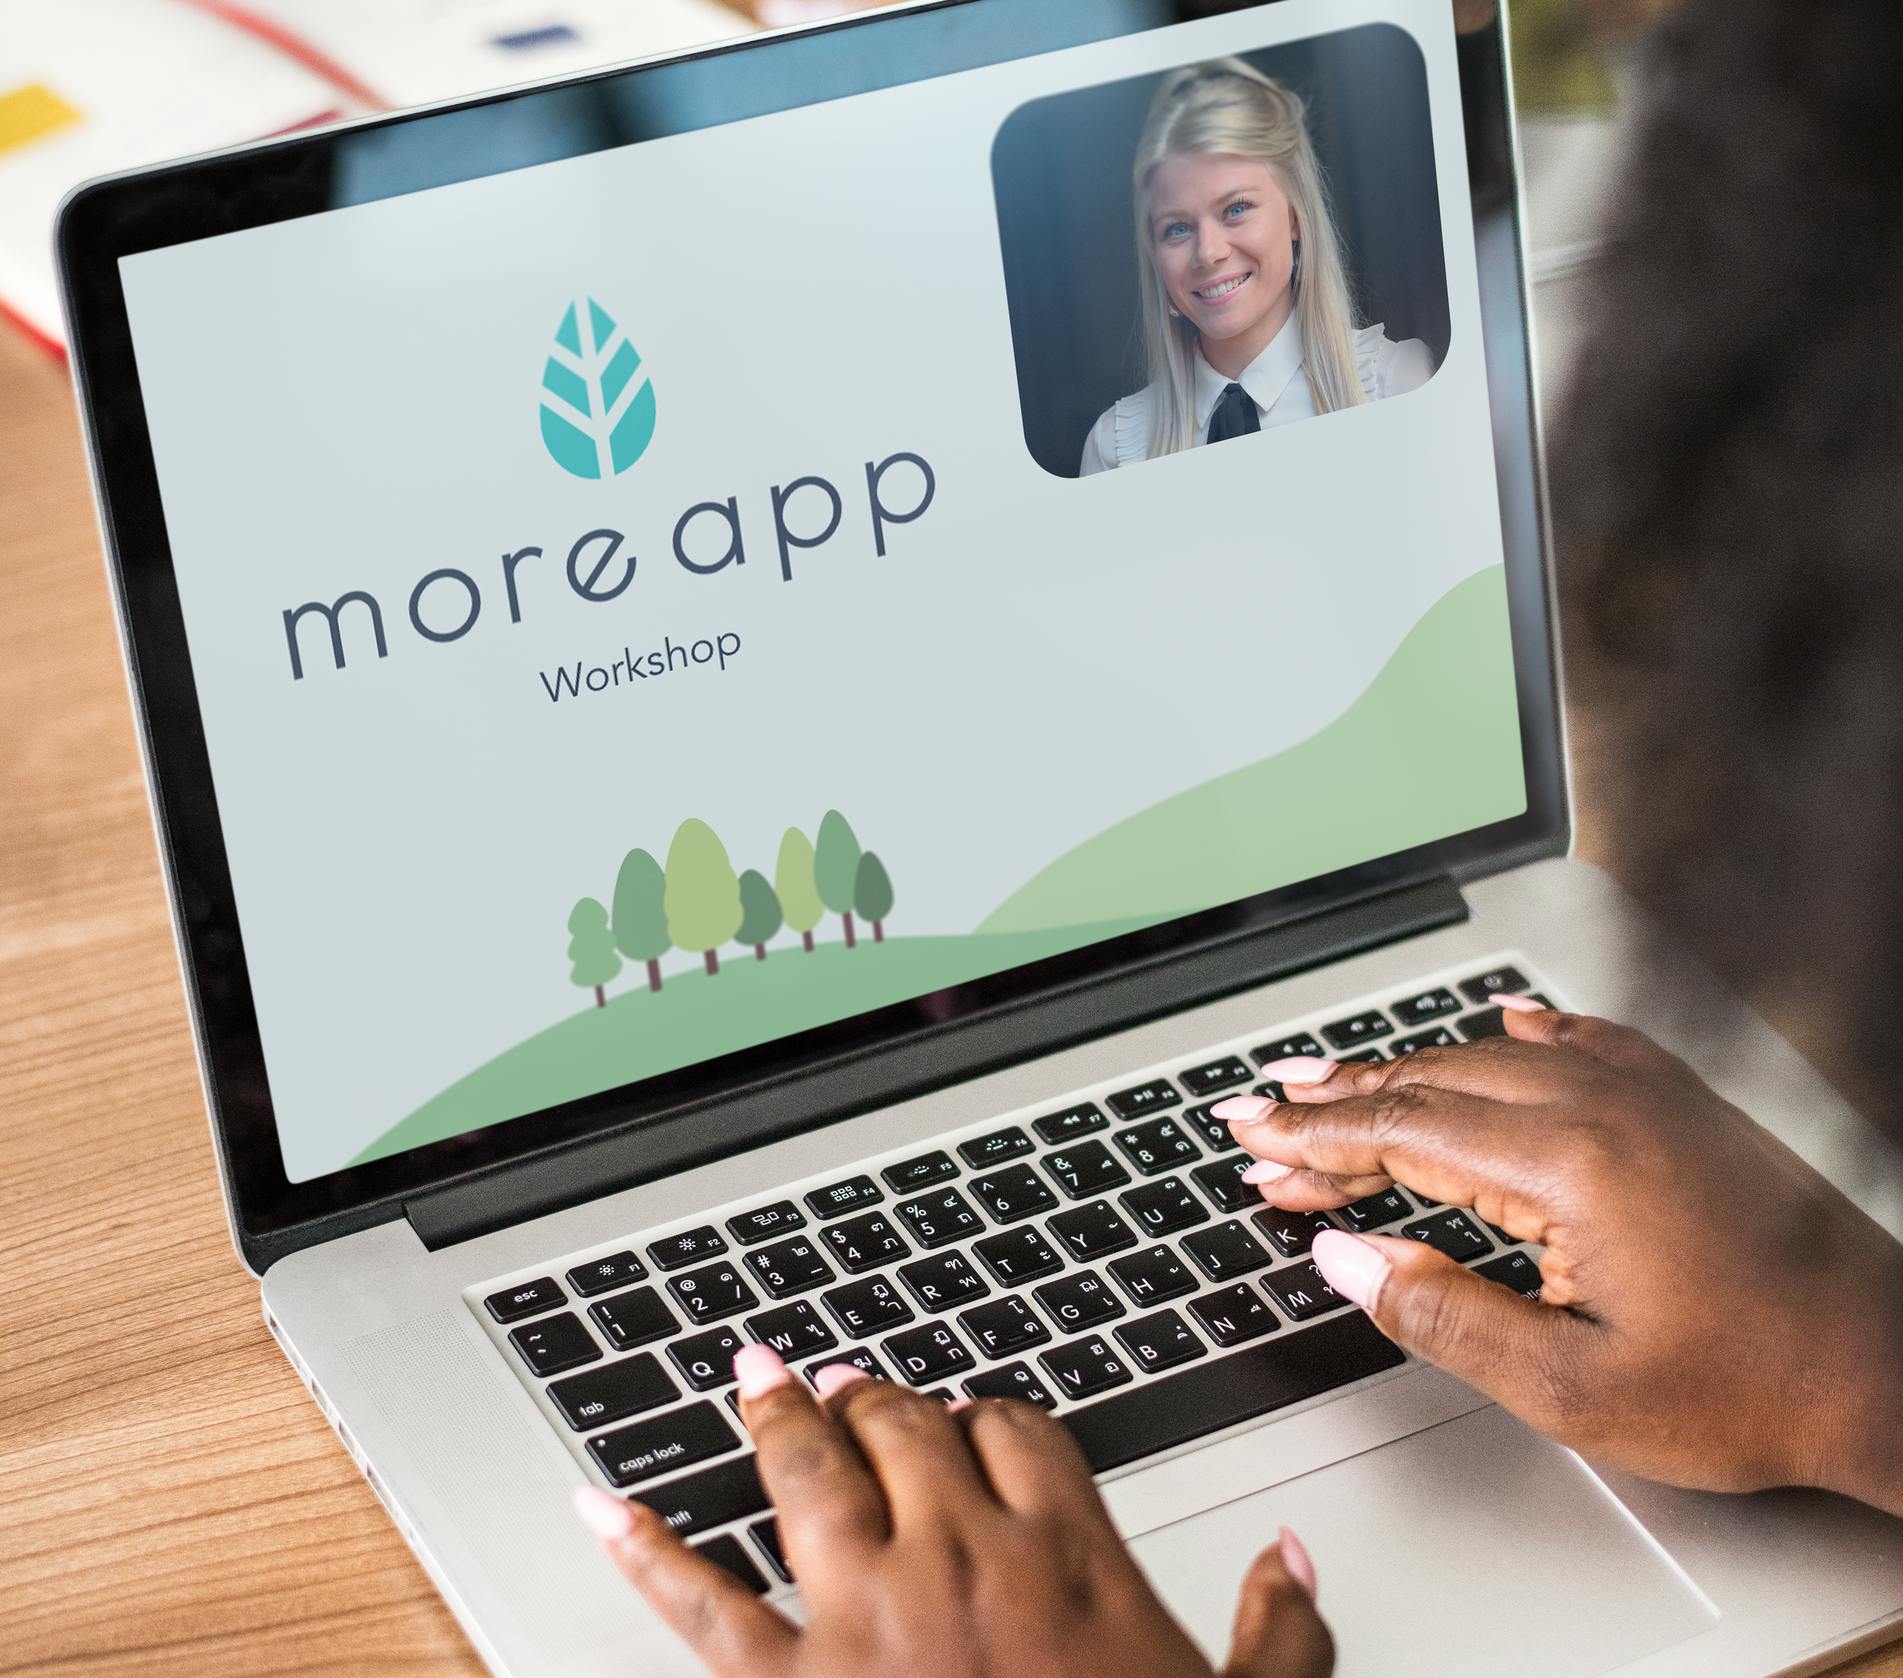 Follow our Online Workshop with MoreApp's Digital Consultant